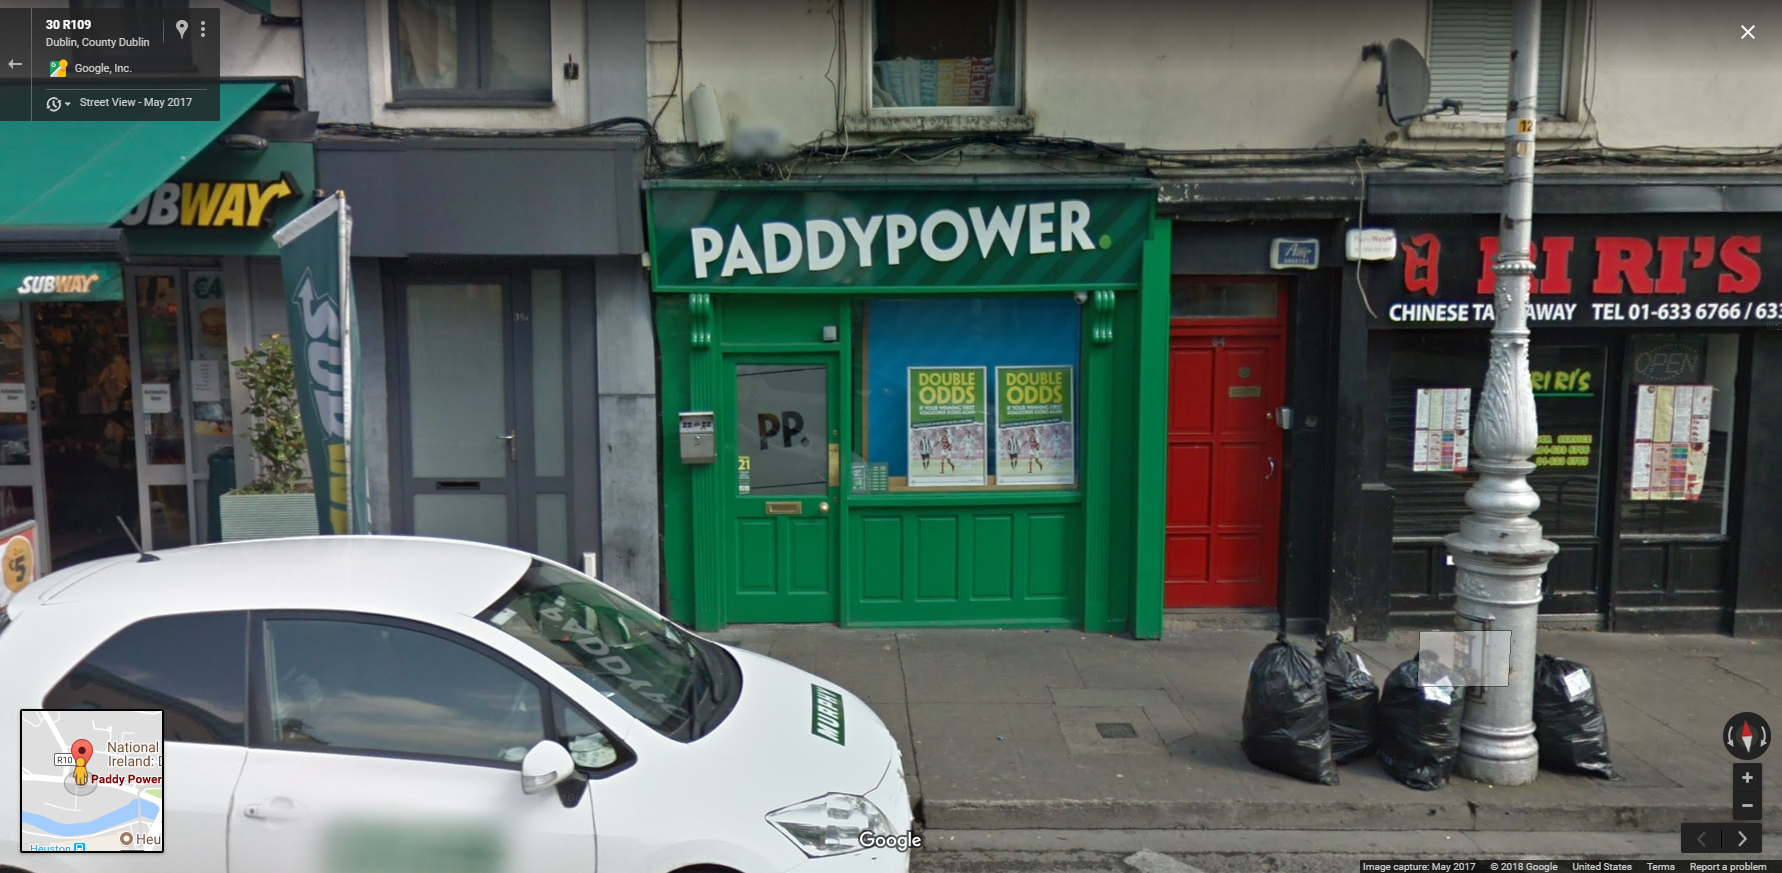 A modest PaddyPower shop in Dublin sits between a Subway and Chinese take-out. Don’t expect to see betting shops like this in the US, even if sports betting becomes legal, thanks to restrictions and cronyism from state lawmakers.